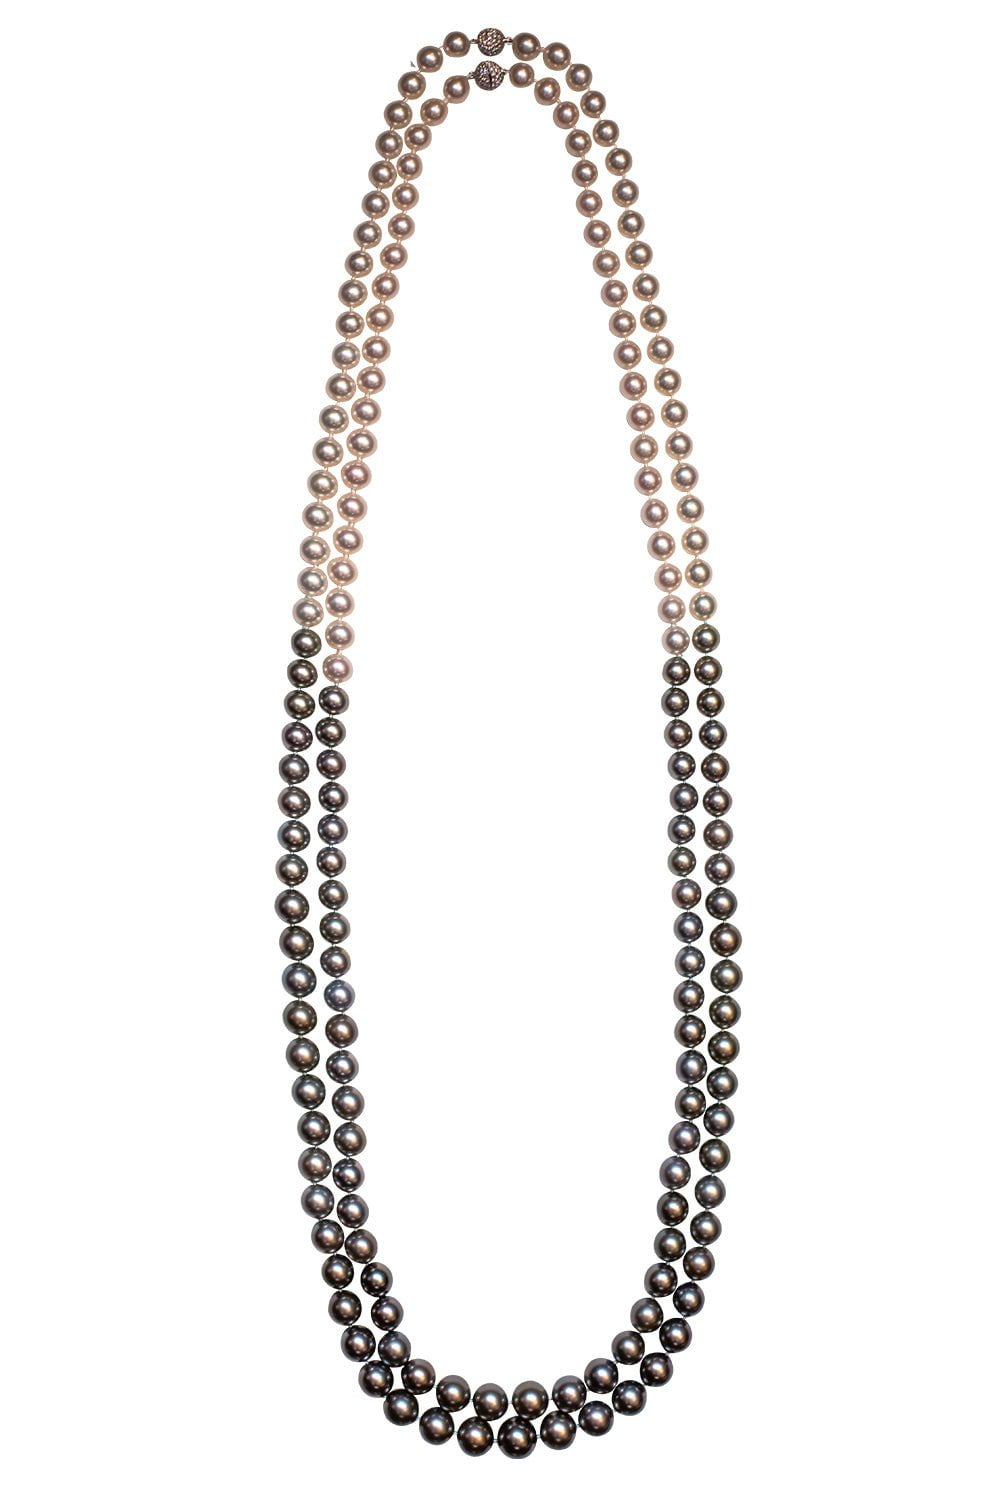 ASSAEL-Ombre Pearl Necklace-WHITE GOLD